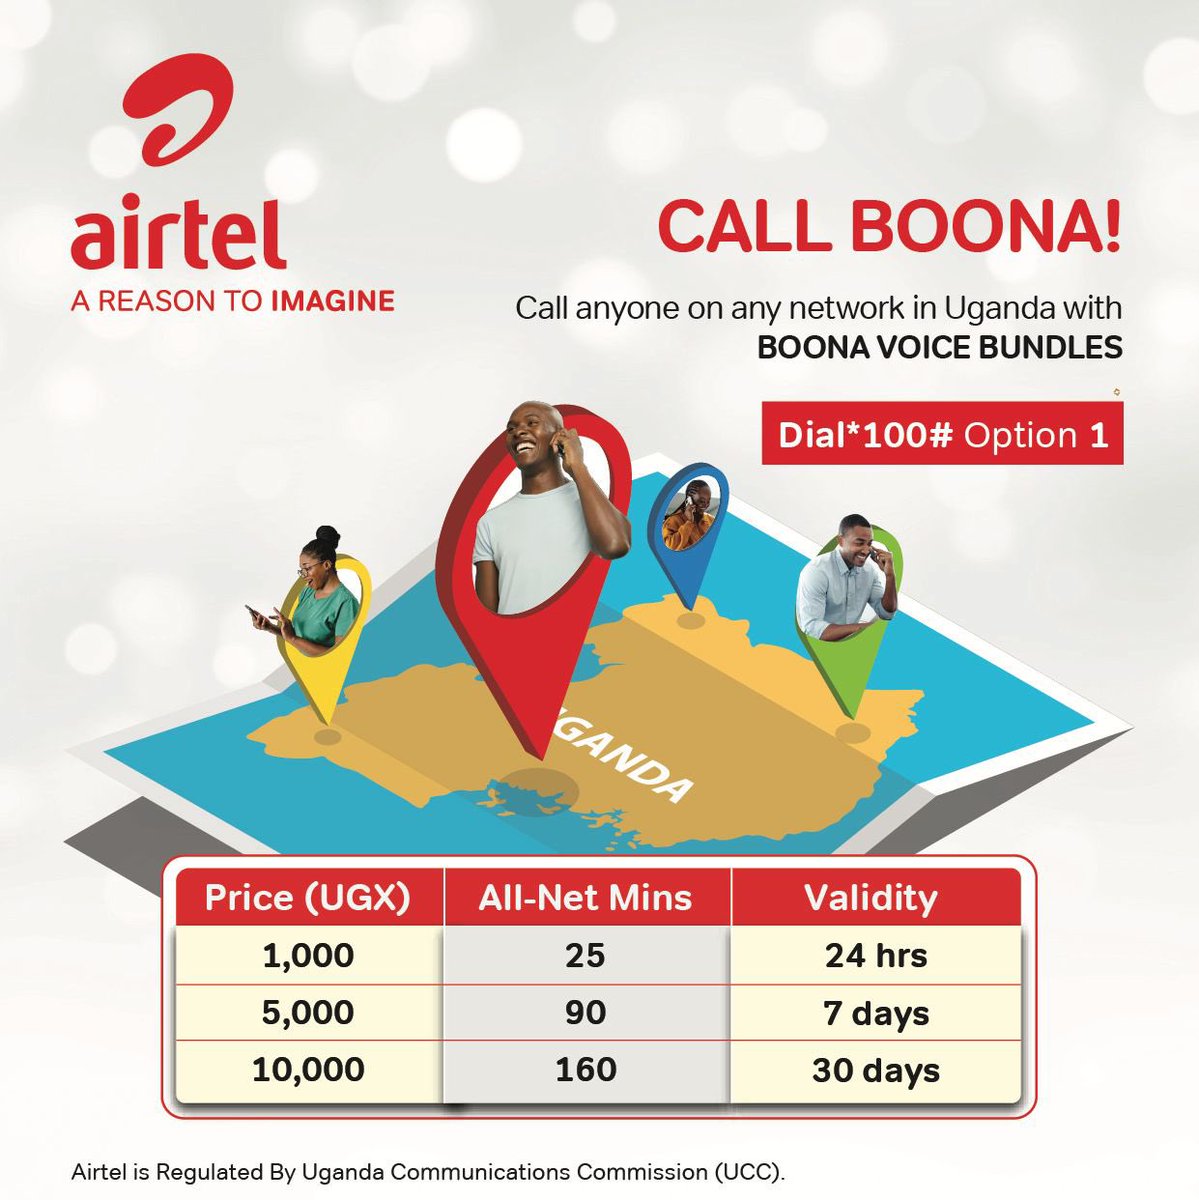 Communication made easy with @Airtel_Ug's Boona voice bundles. Stay connected with loved ones across all networks effortlessly. Dial *100# option 1 to start enjoying hassle-free calls. #CallBoona